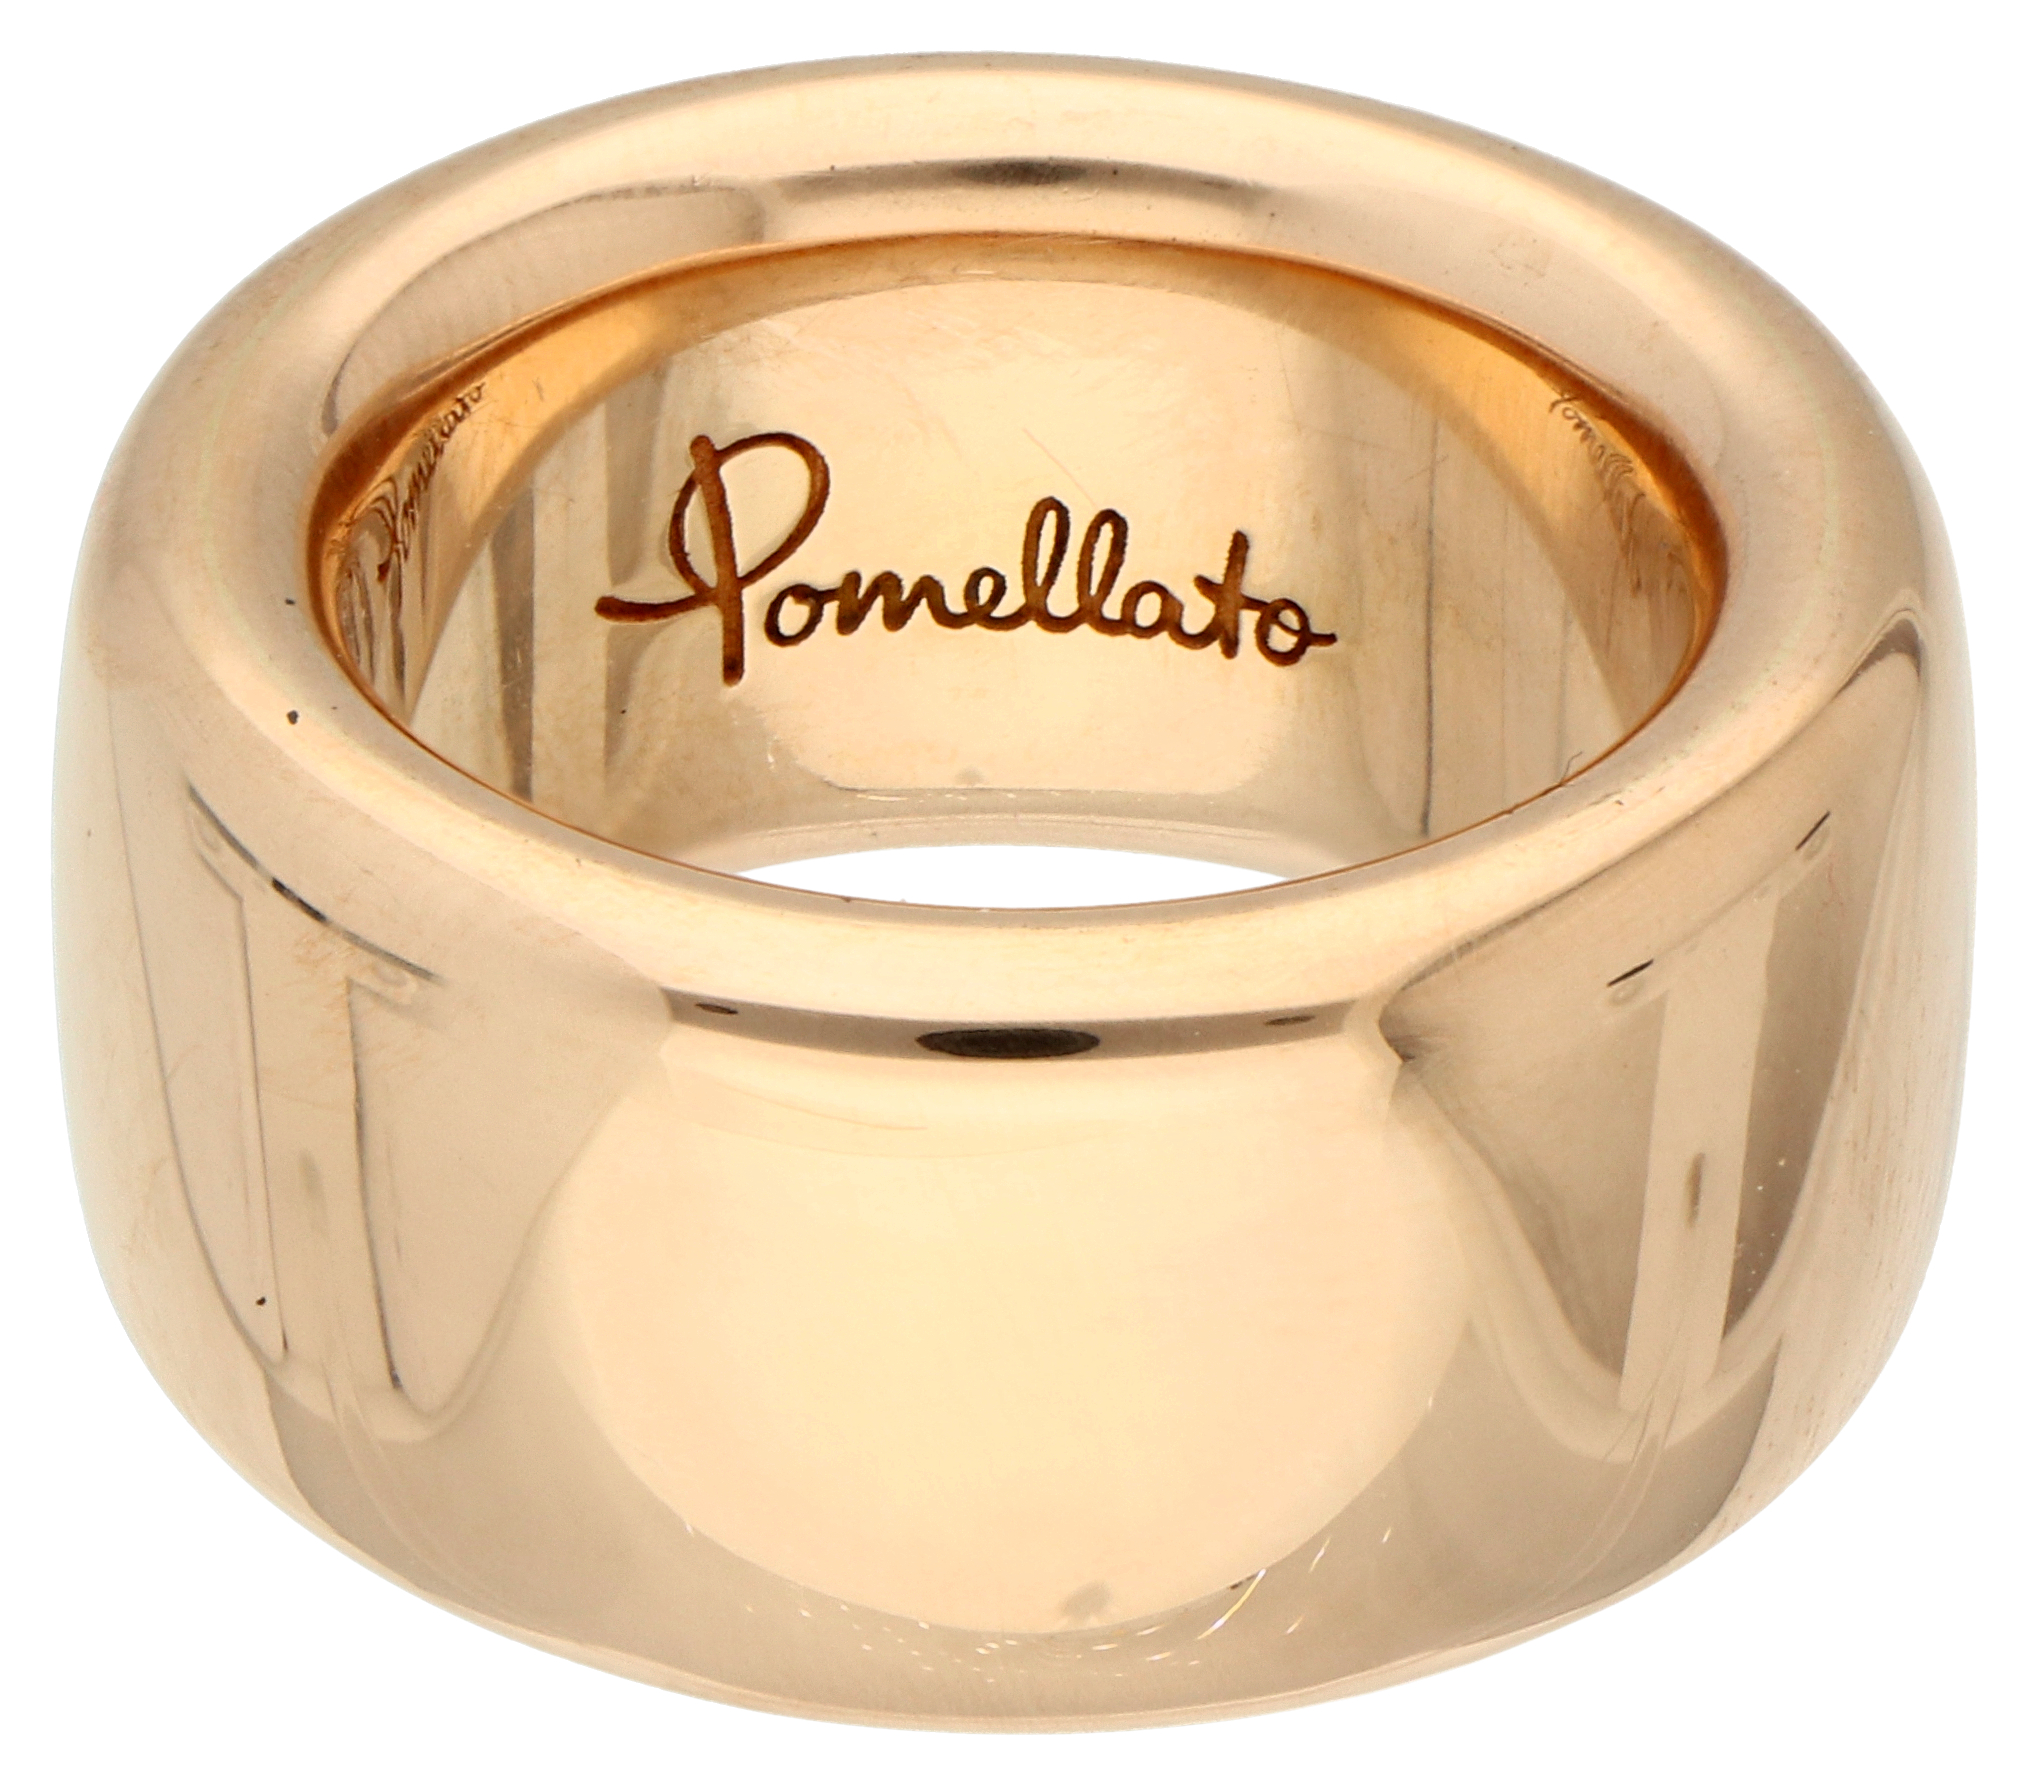 No Reserve - Pomellato 18K rose gold Iconica ring. - Image 2 of 4